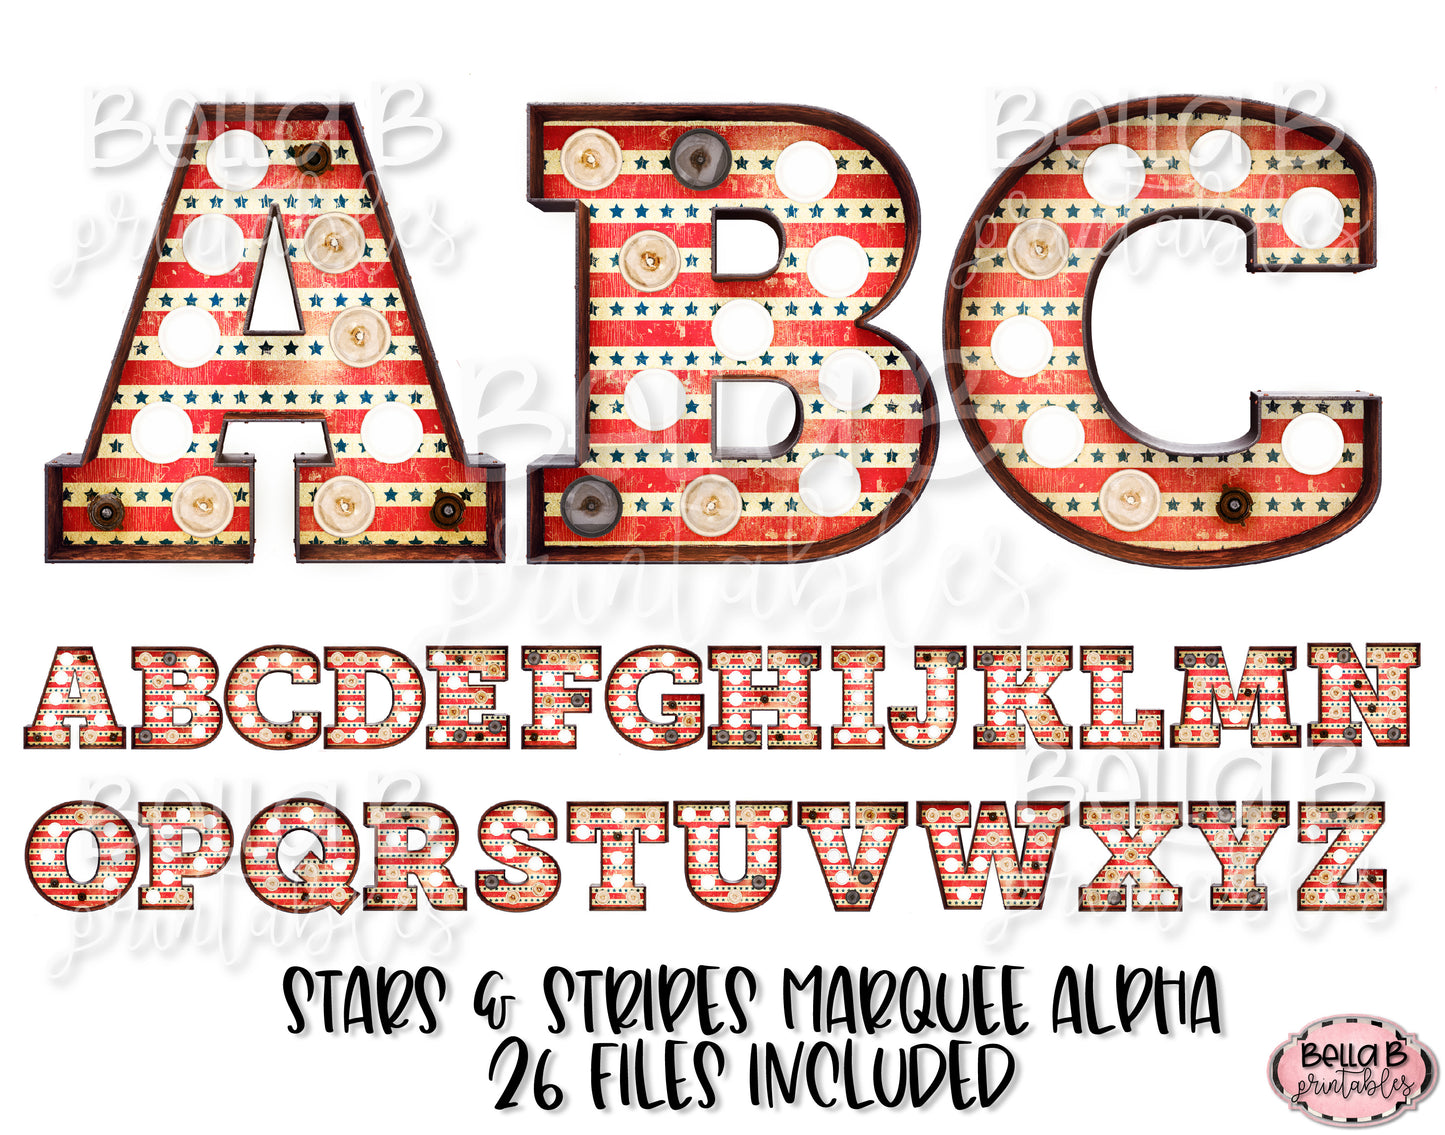 Stars and Stripes Marquee Alphabet Letters, Marquee Alphabet Set